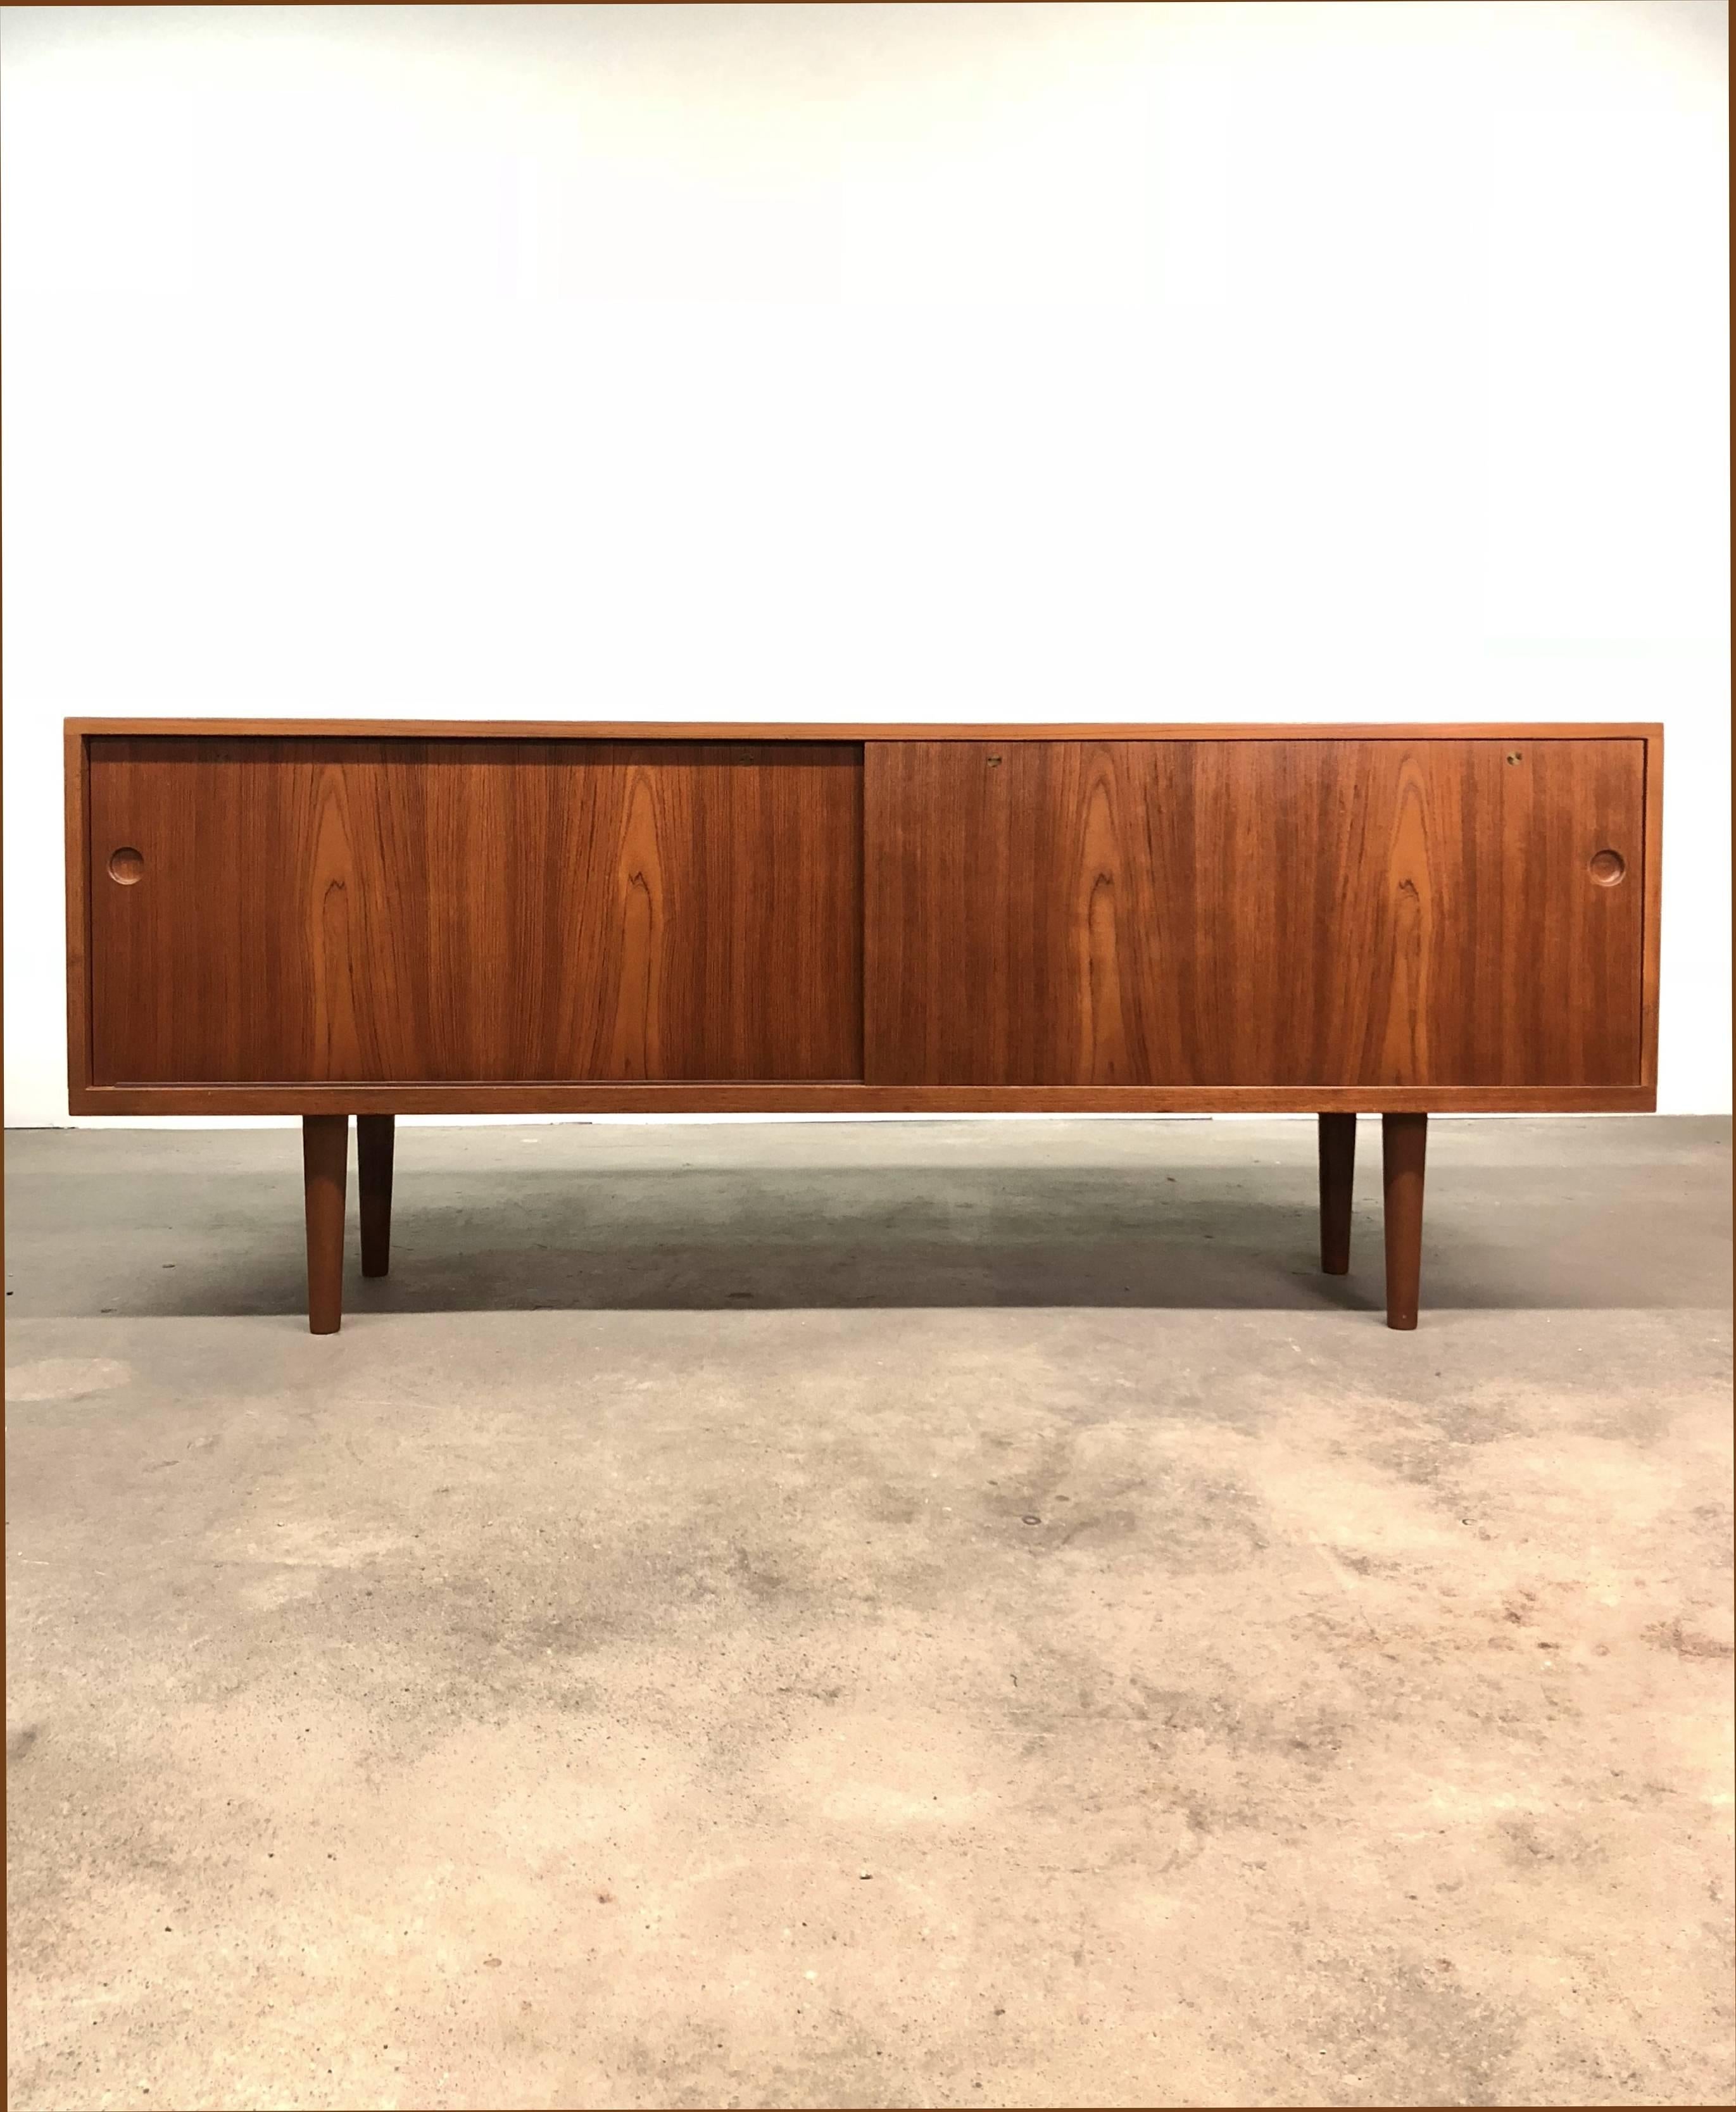 Credenza/sideboard model 26, in Teak, oak and brass, designed by Hans J. Wegner and produced in Denmark by Ry Møbler, circa 1966. Credenza features sliding doors, that open to reveal a series of storage spaces, adjustable shelves and drawers.